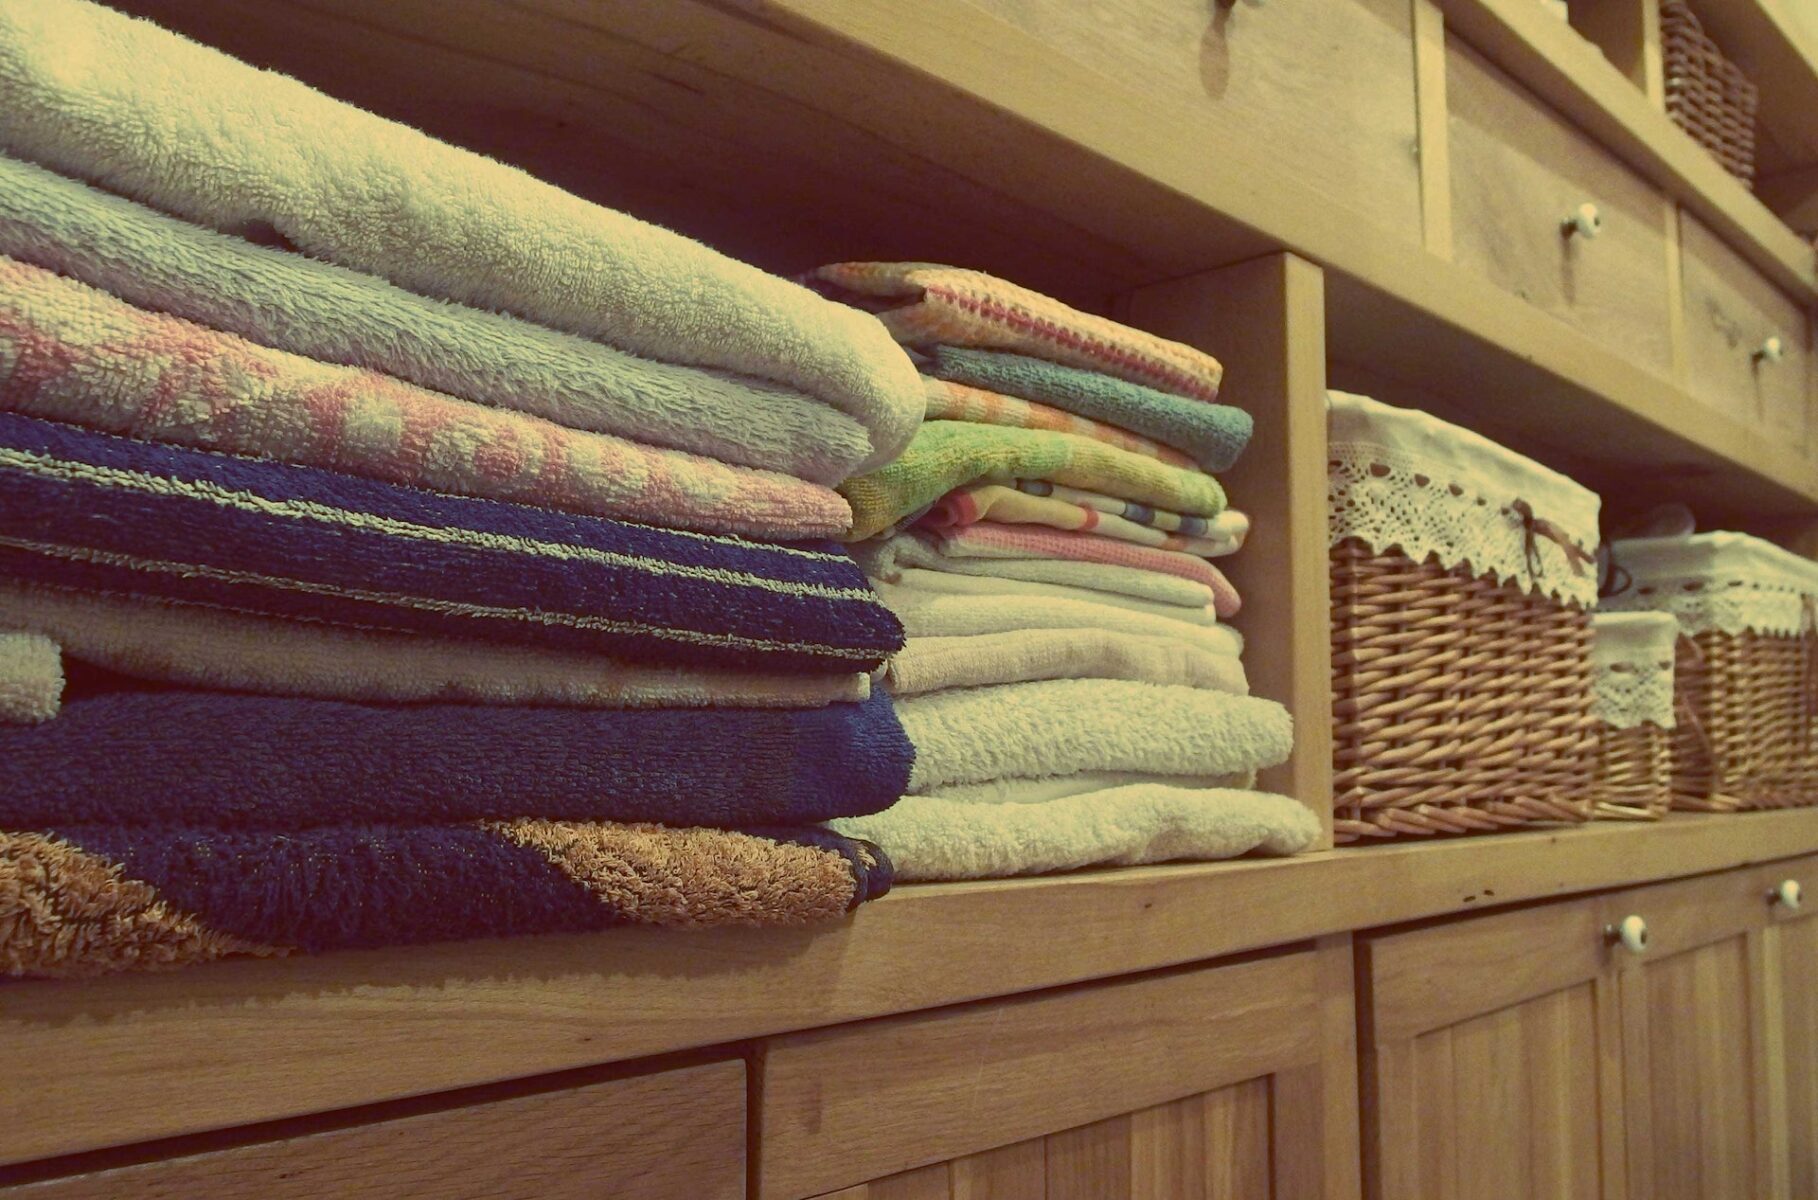 How to Improve Your Laundry Room